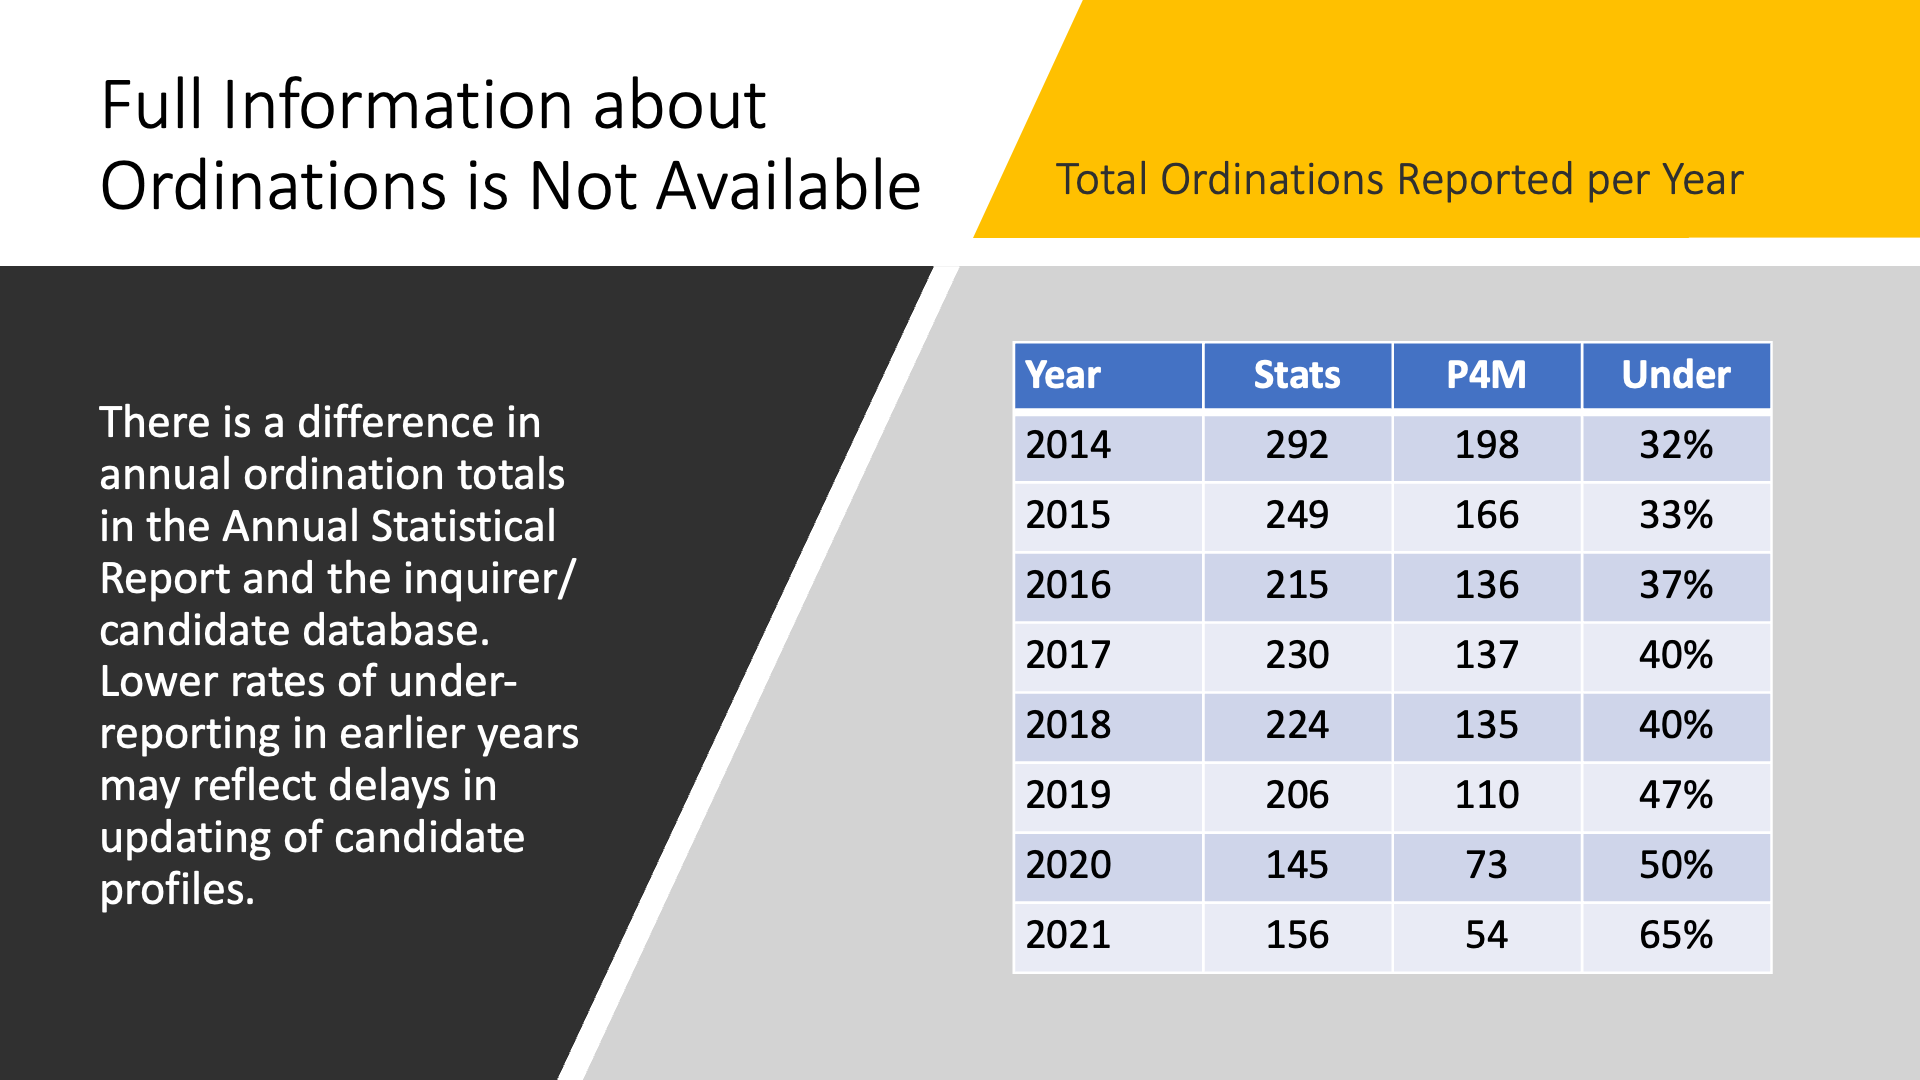 Chart of data presenting under-reporting of candidate ordinations ranging from 32% to 65% from 2014 to 2021